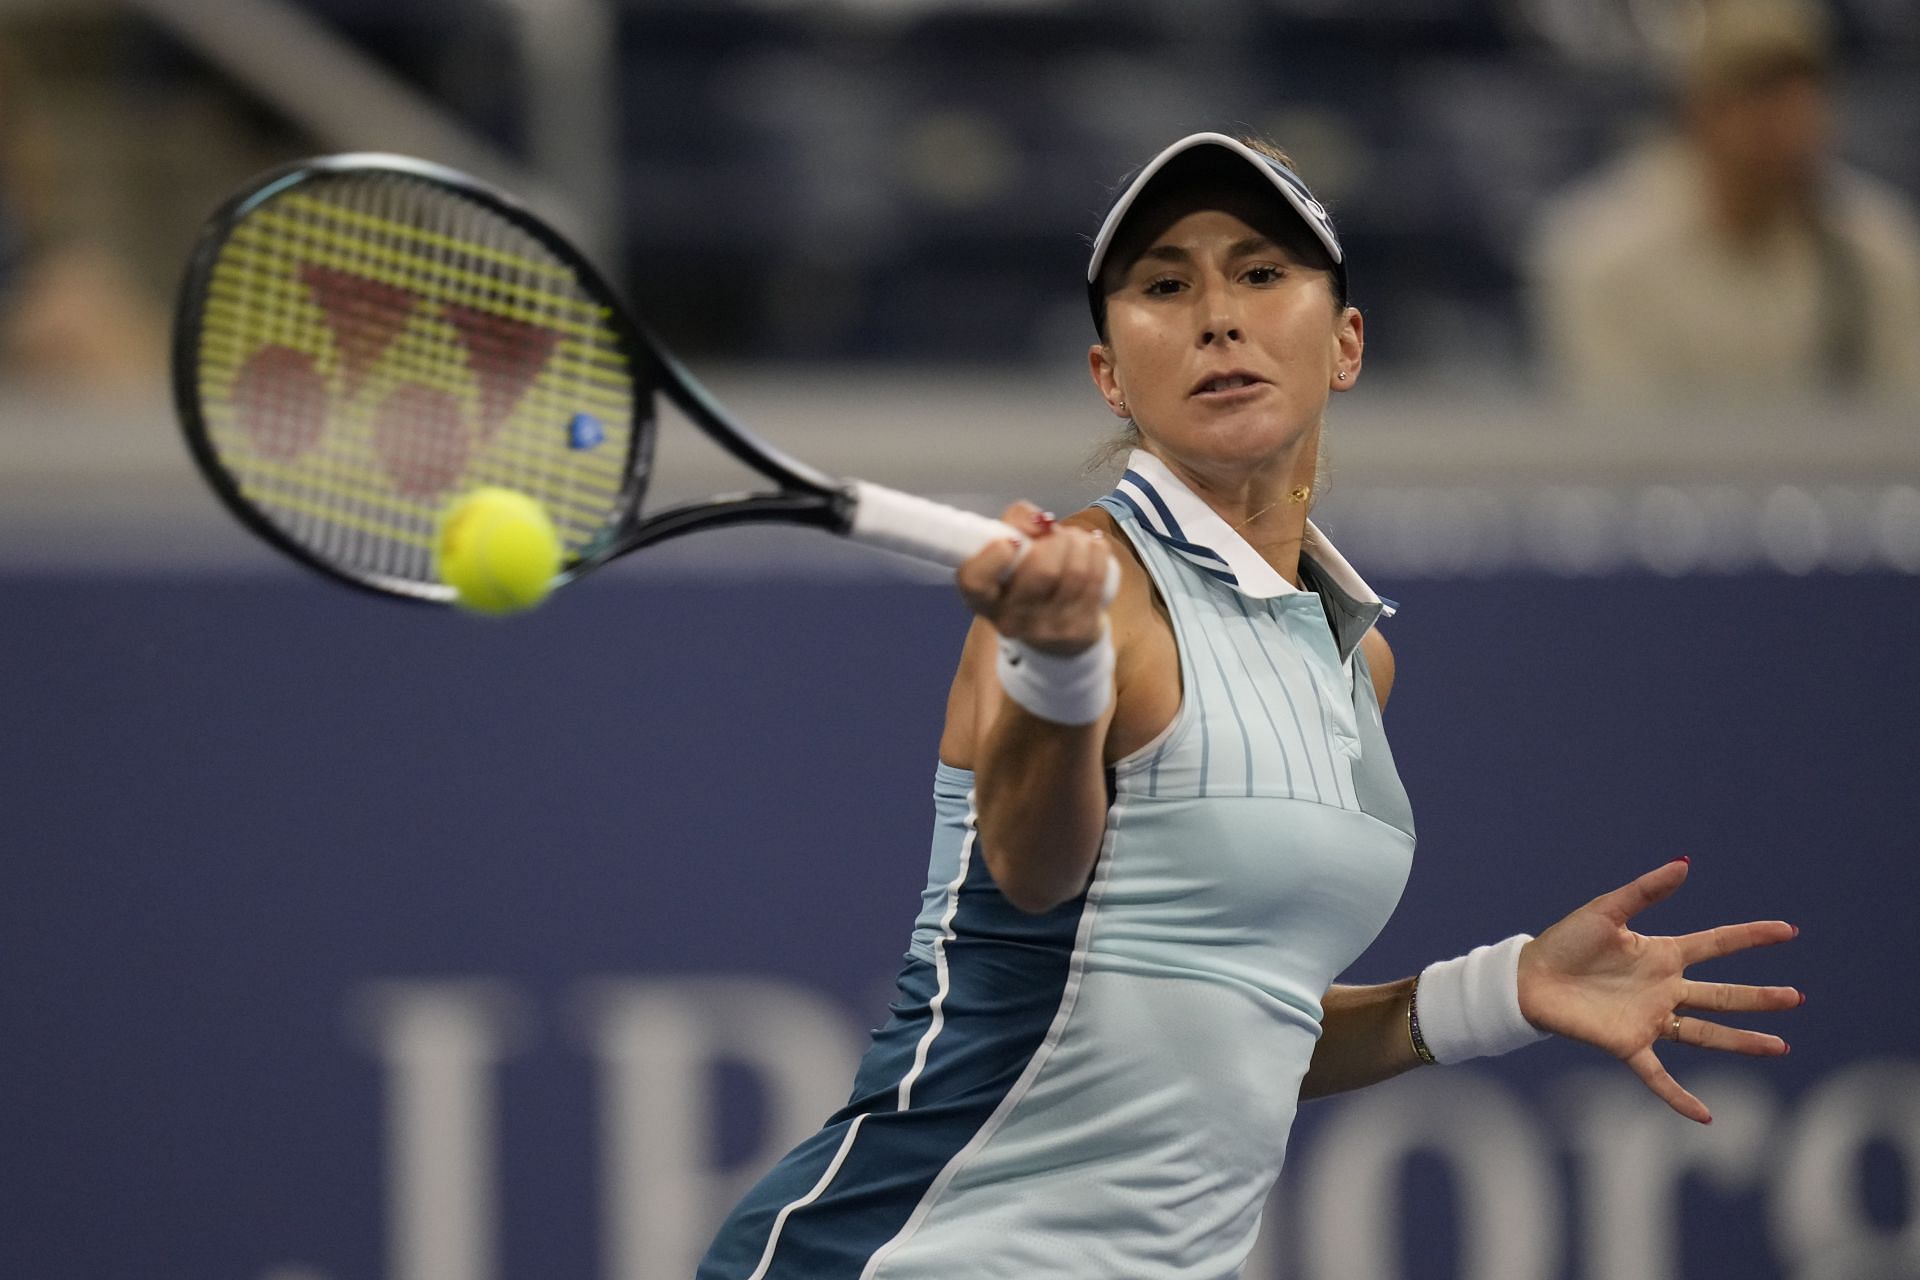 Belinda Bencic plays a forehand at US Open